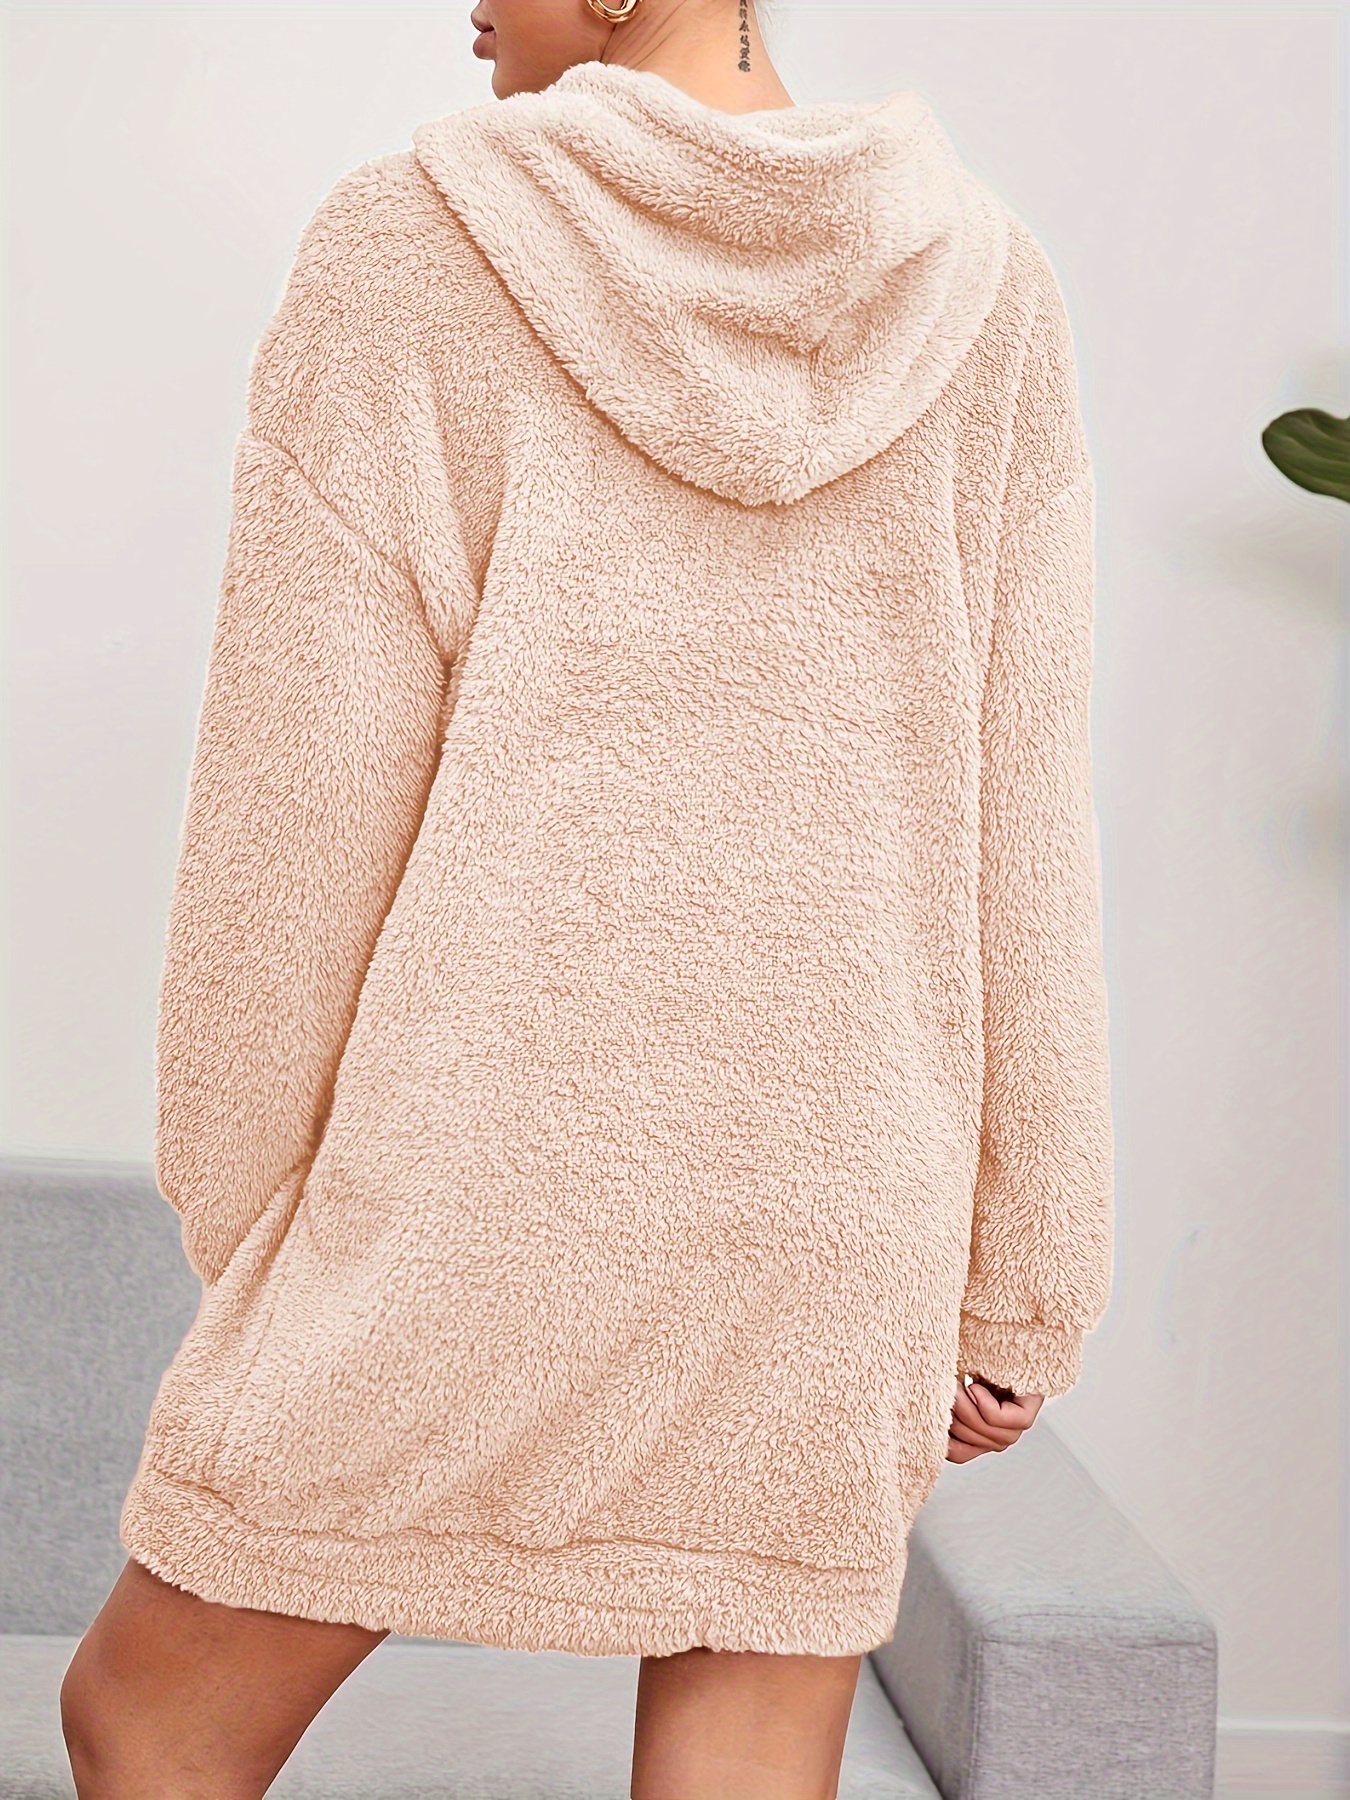 hooded teddy dress casual solid long sleeve warm dress womens clothing details 6